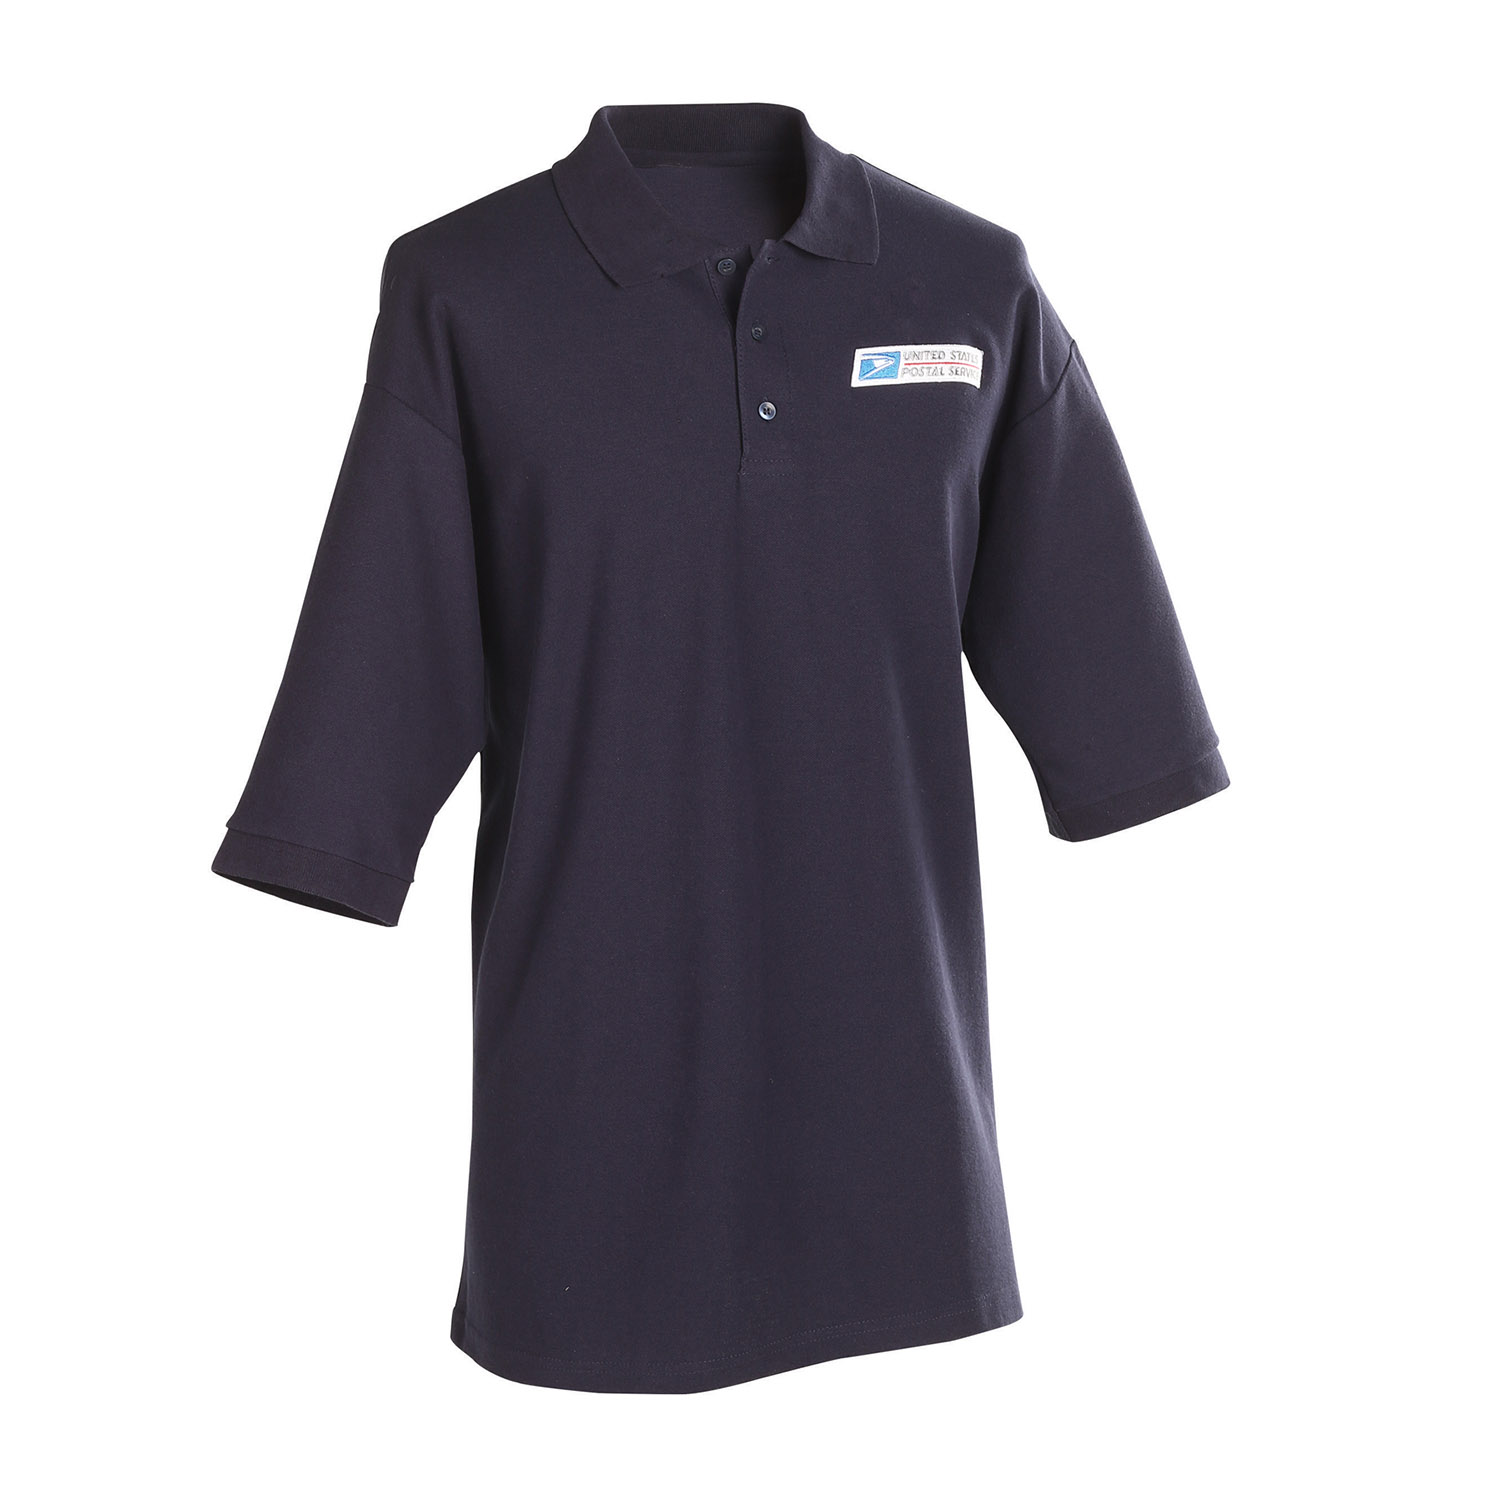 By Sai 2XL New United States Postal Service Navy Blue Polo Shirt By A 